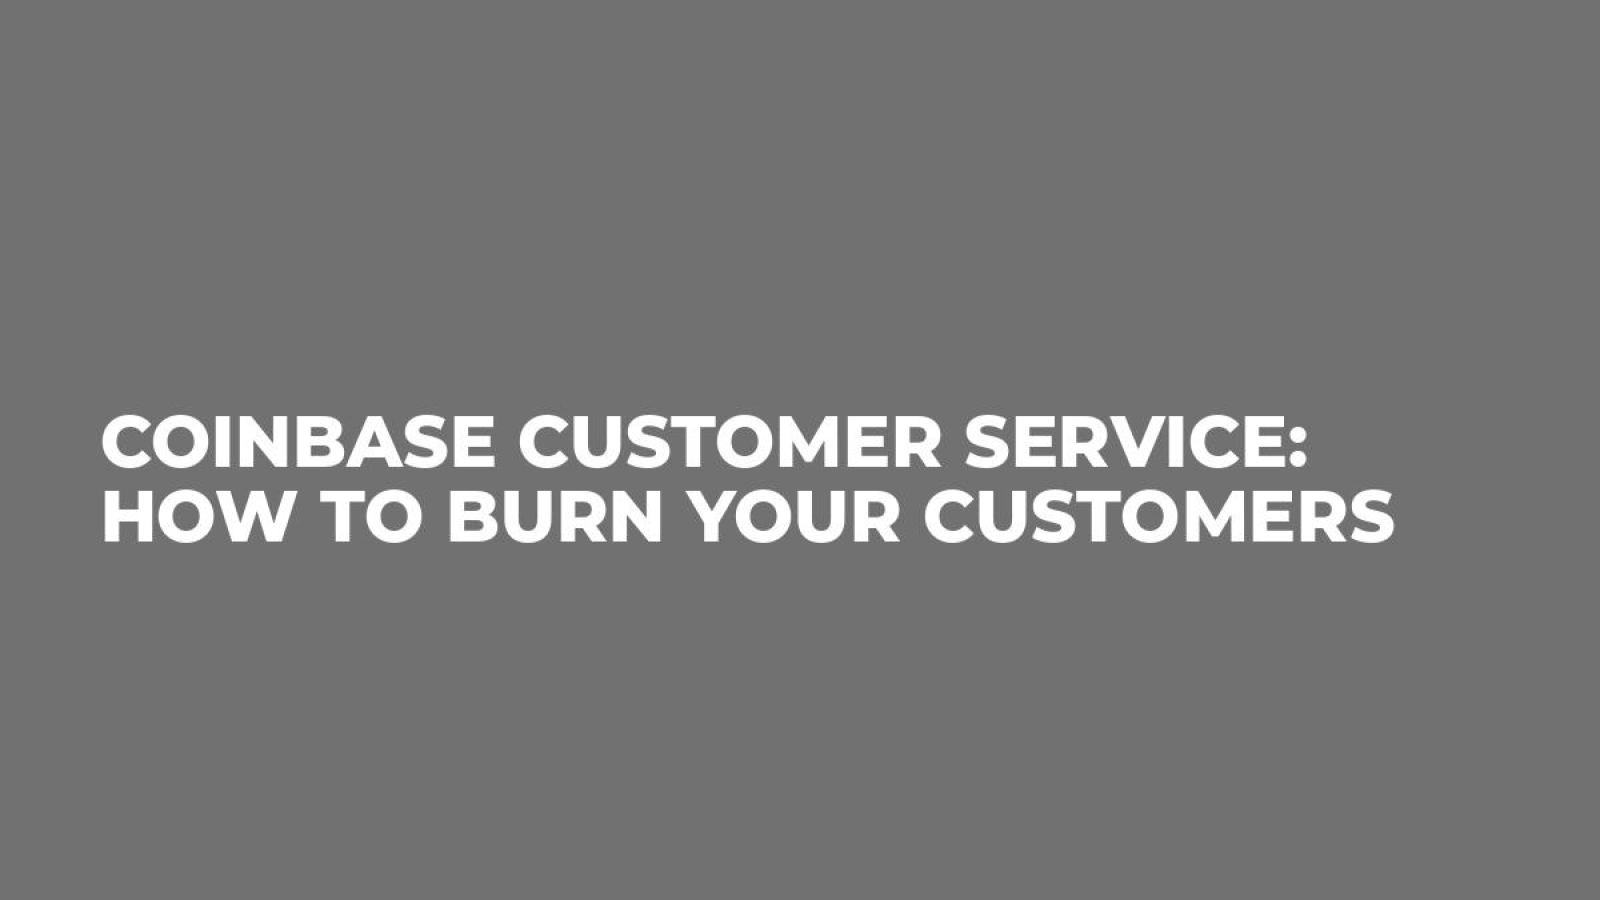 Coinbase Customer Service: How to Burn Your Customers